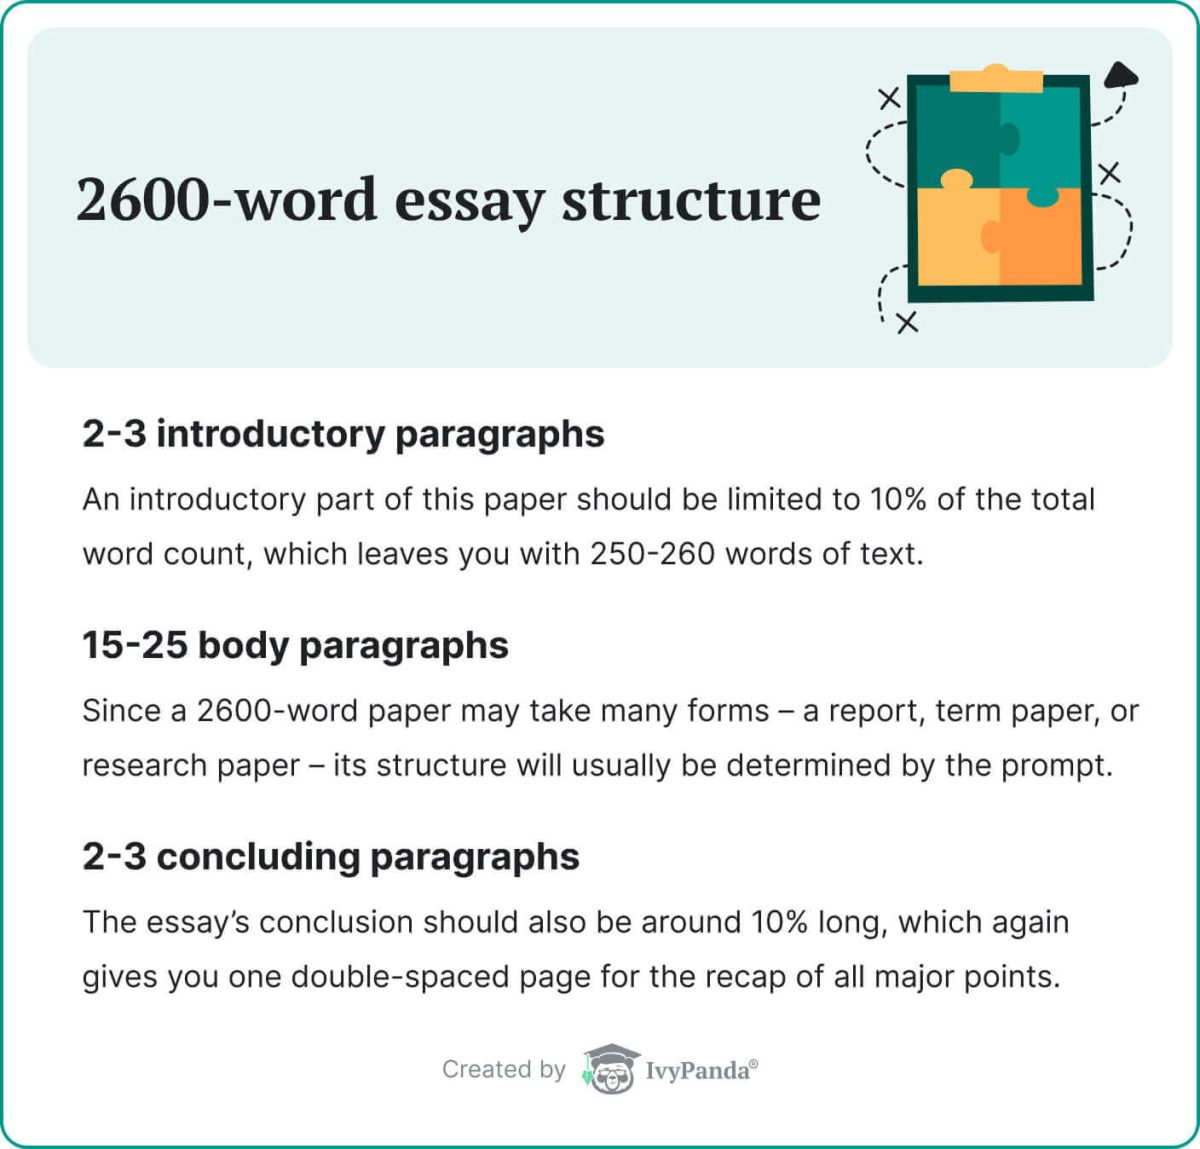 The picture lists the structural components of a 2600-word essay. 